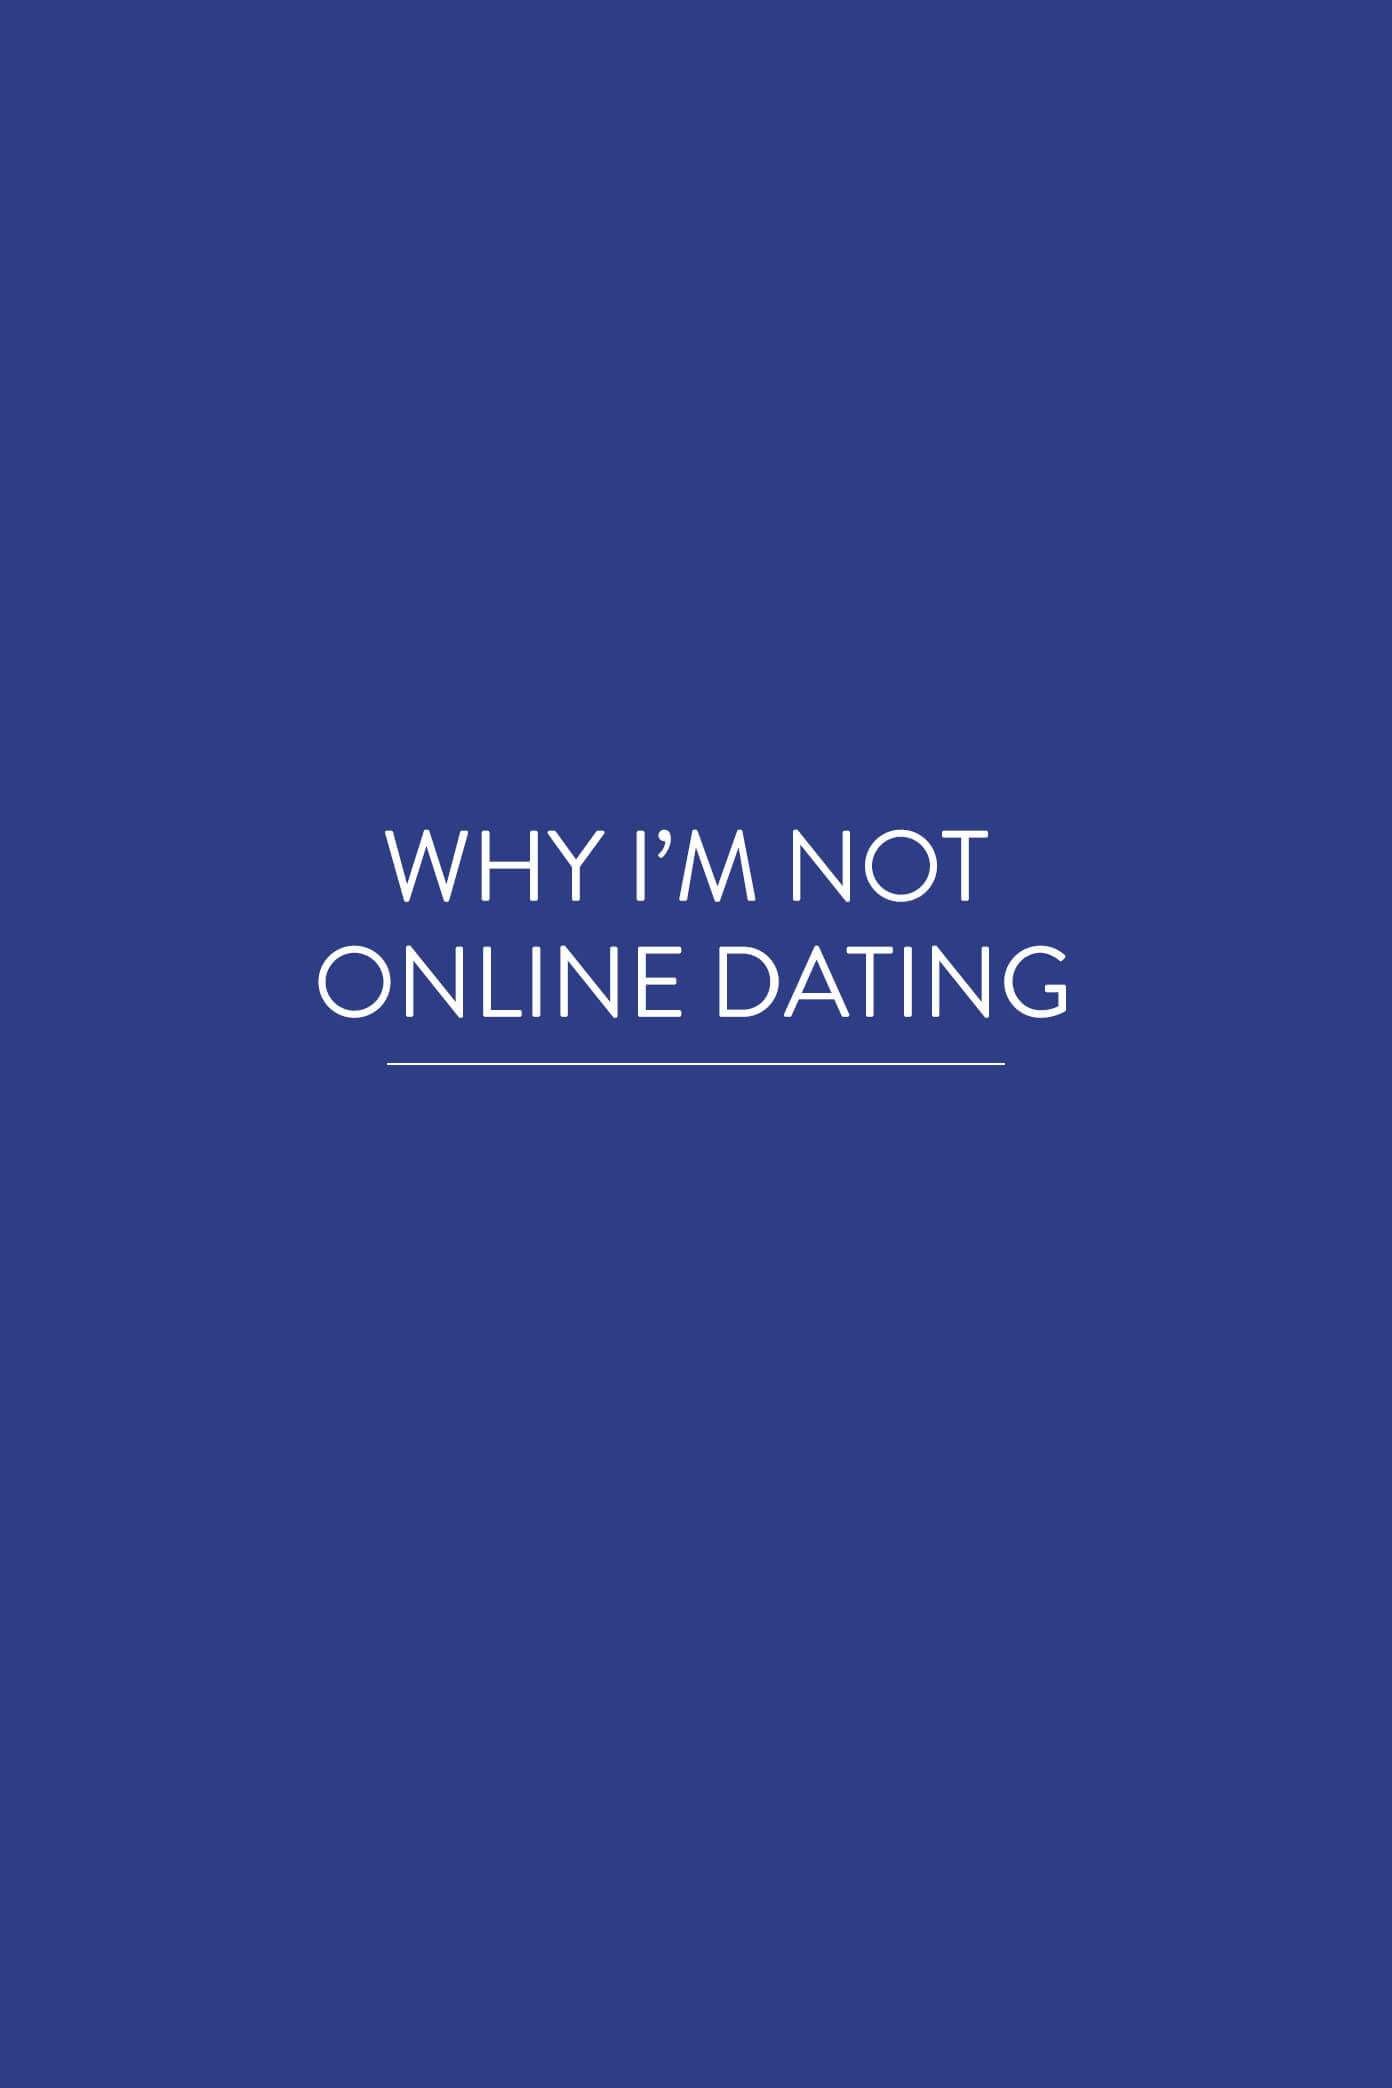 Dating but not online